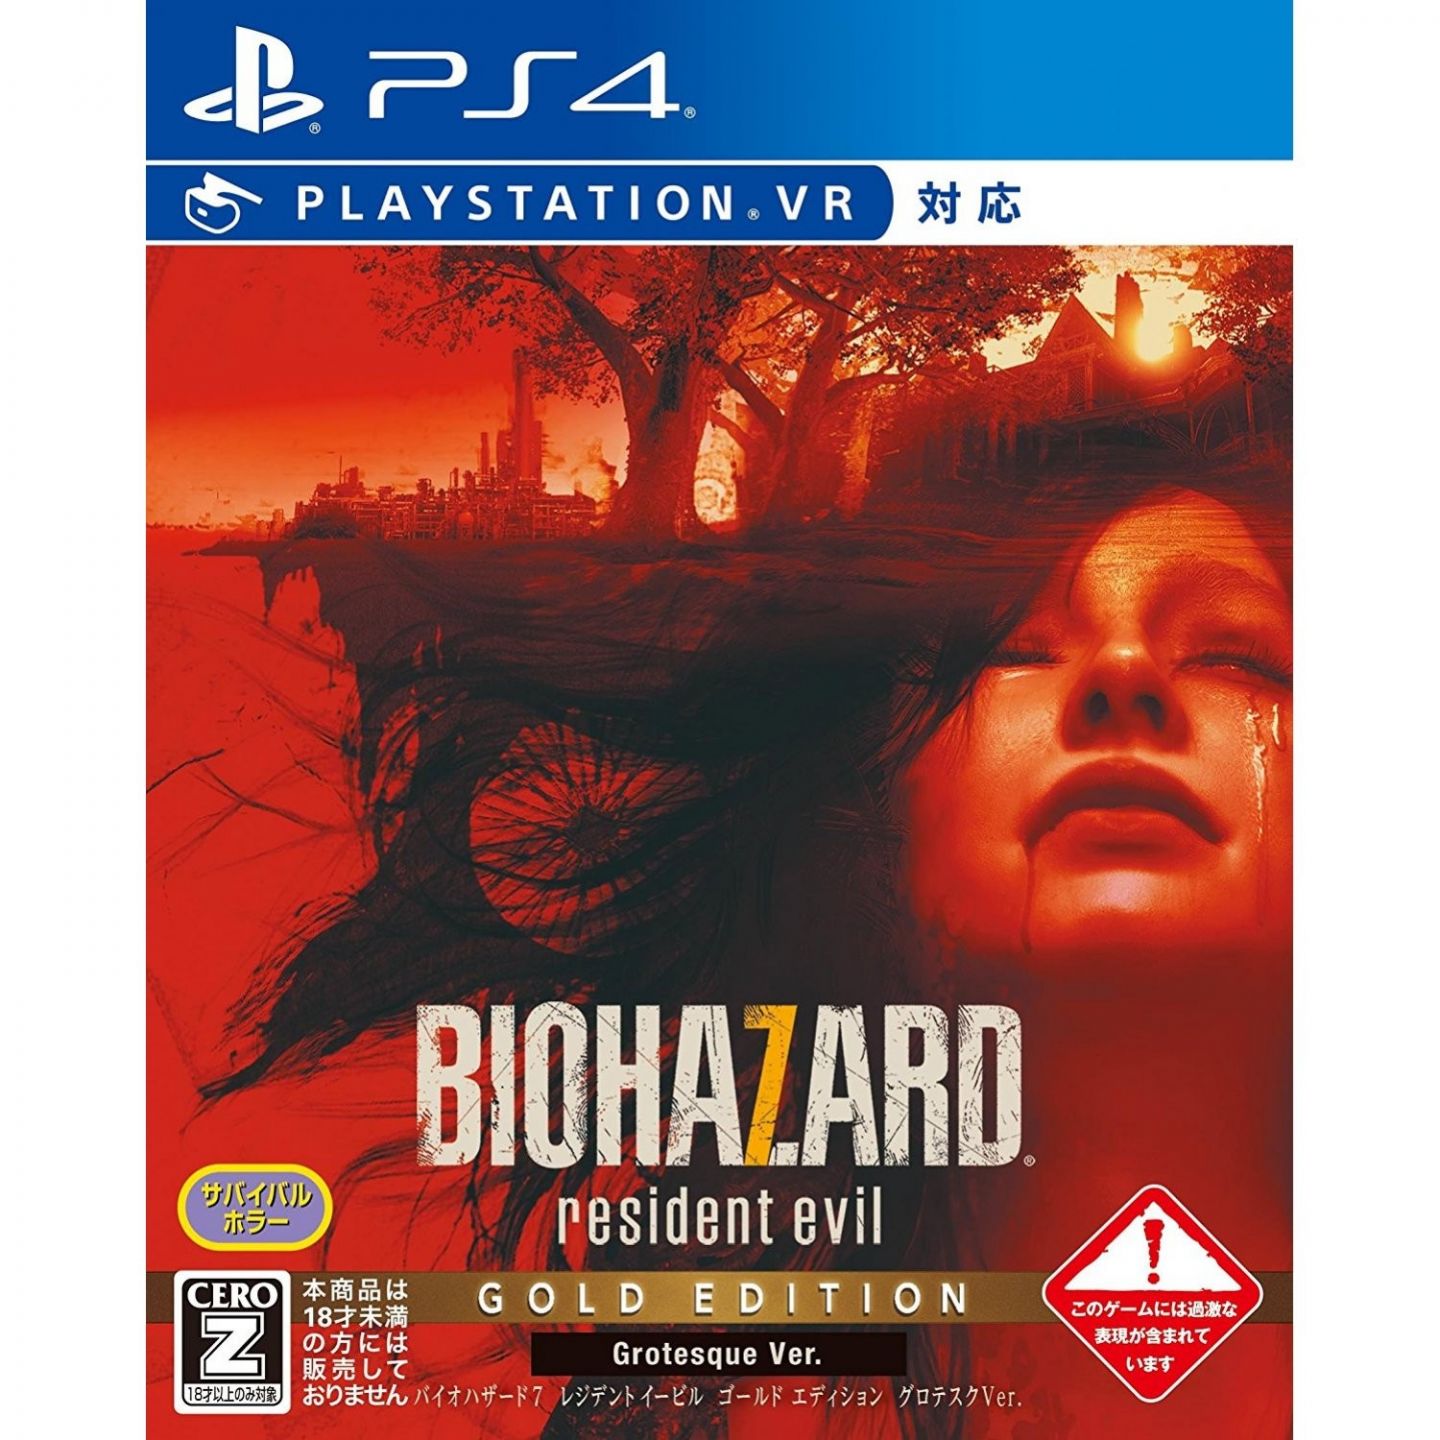 Resident 7 gold edition